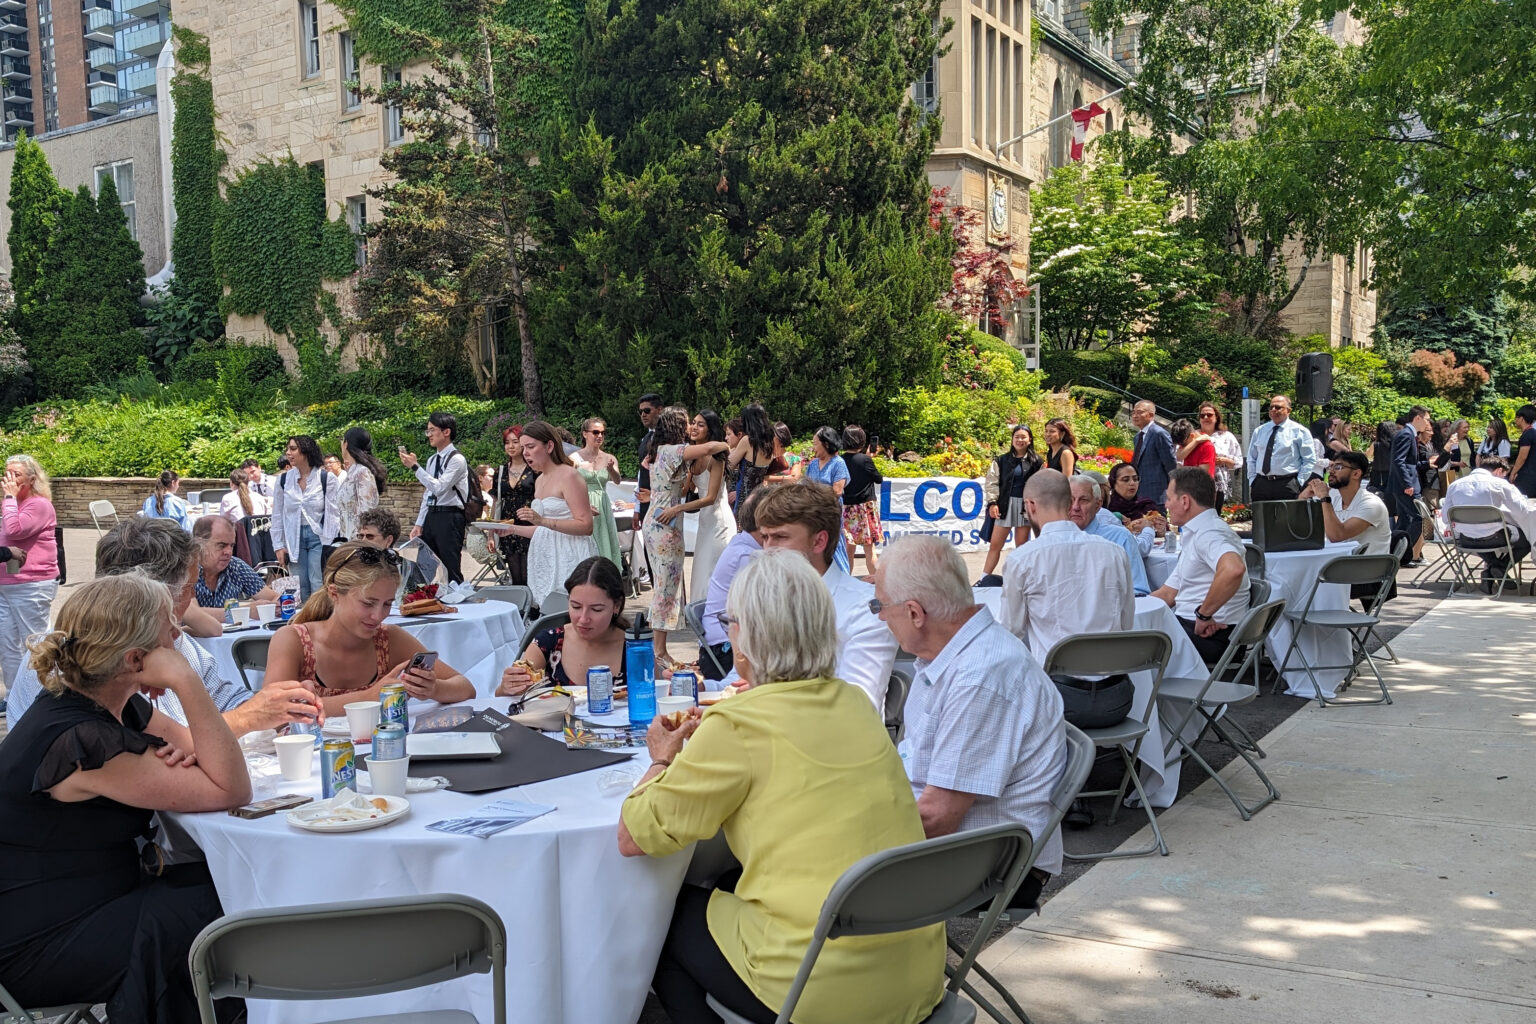 Reception for Class of 2024 held on Elmsley Lane.